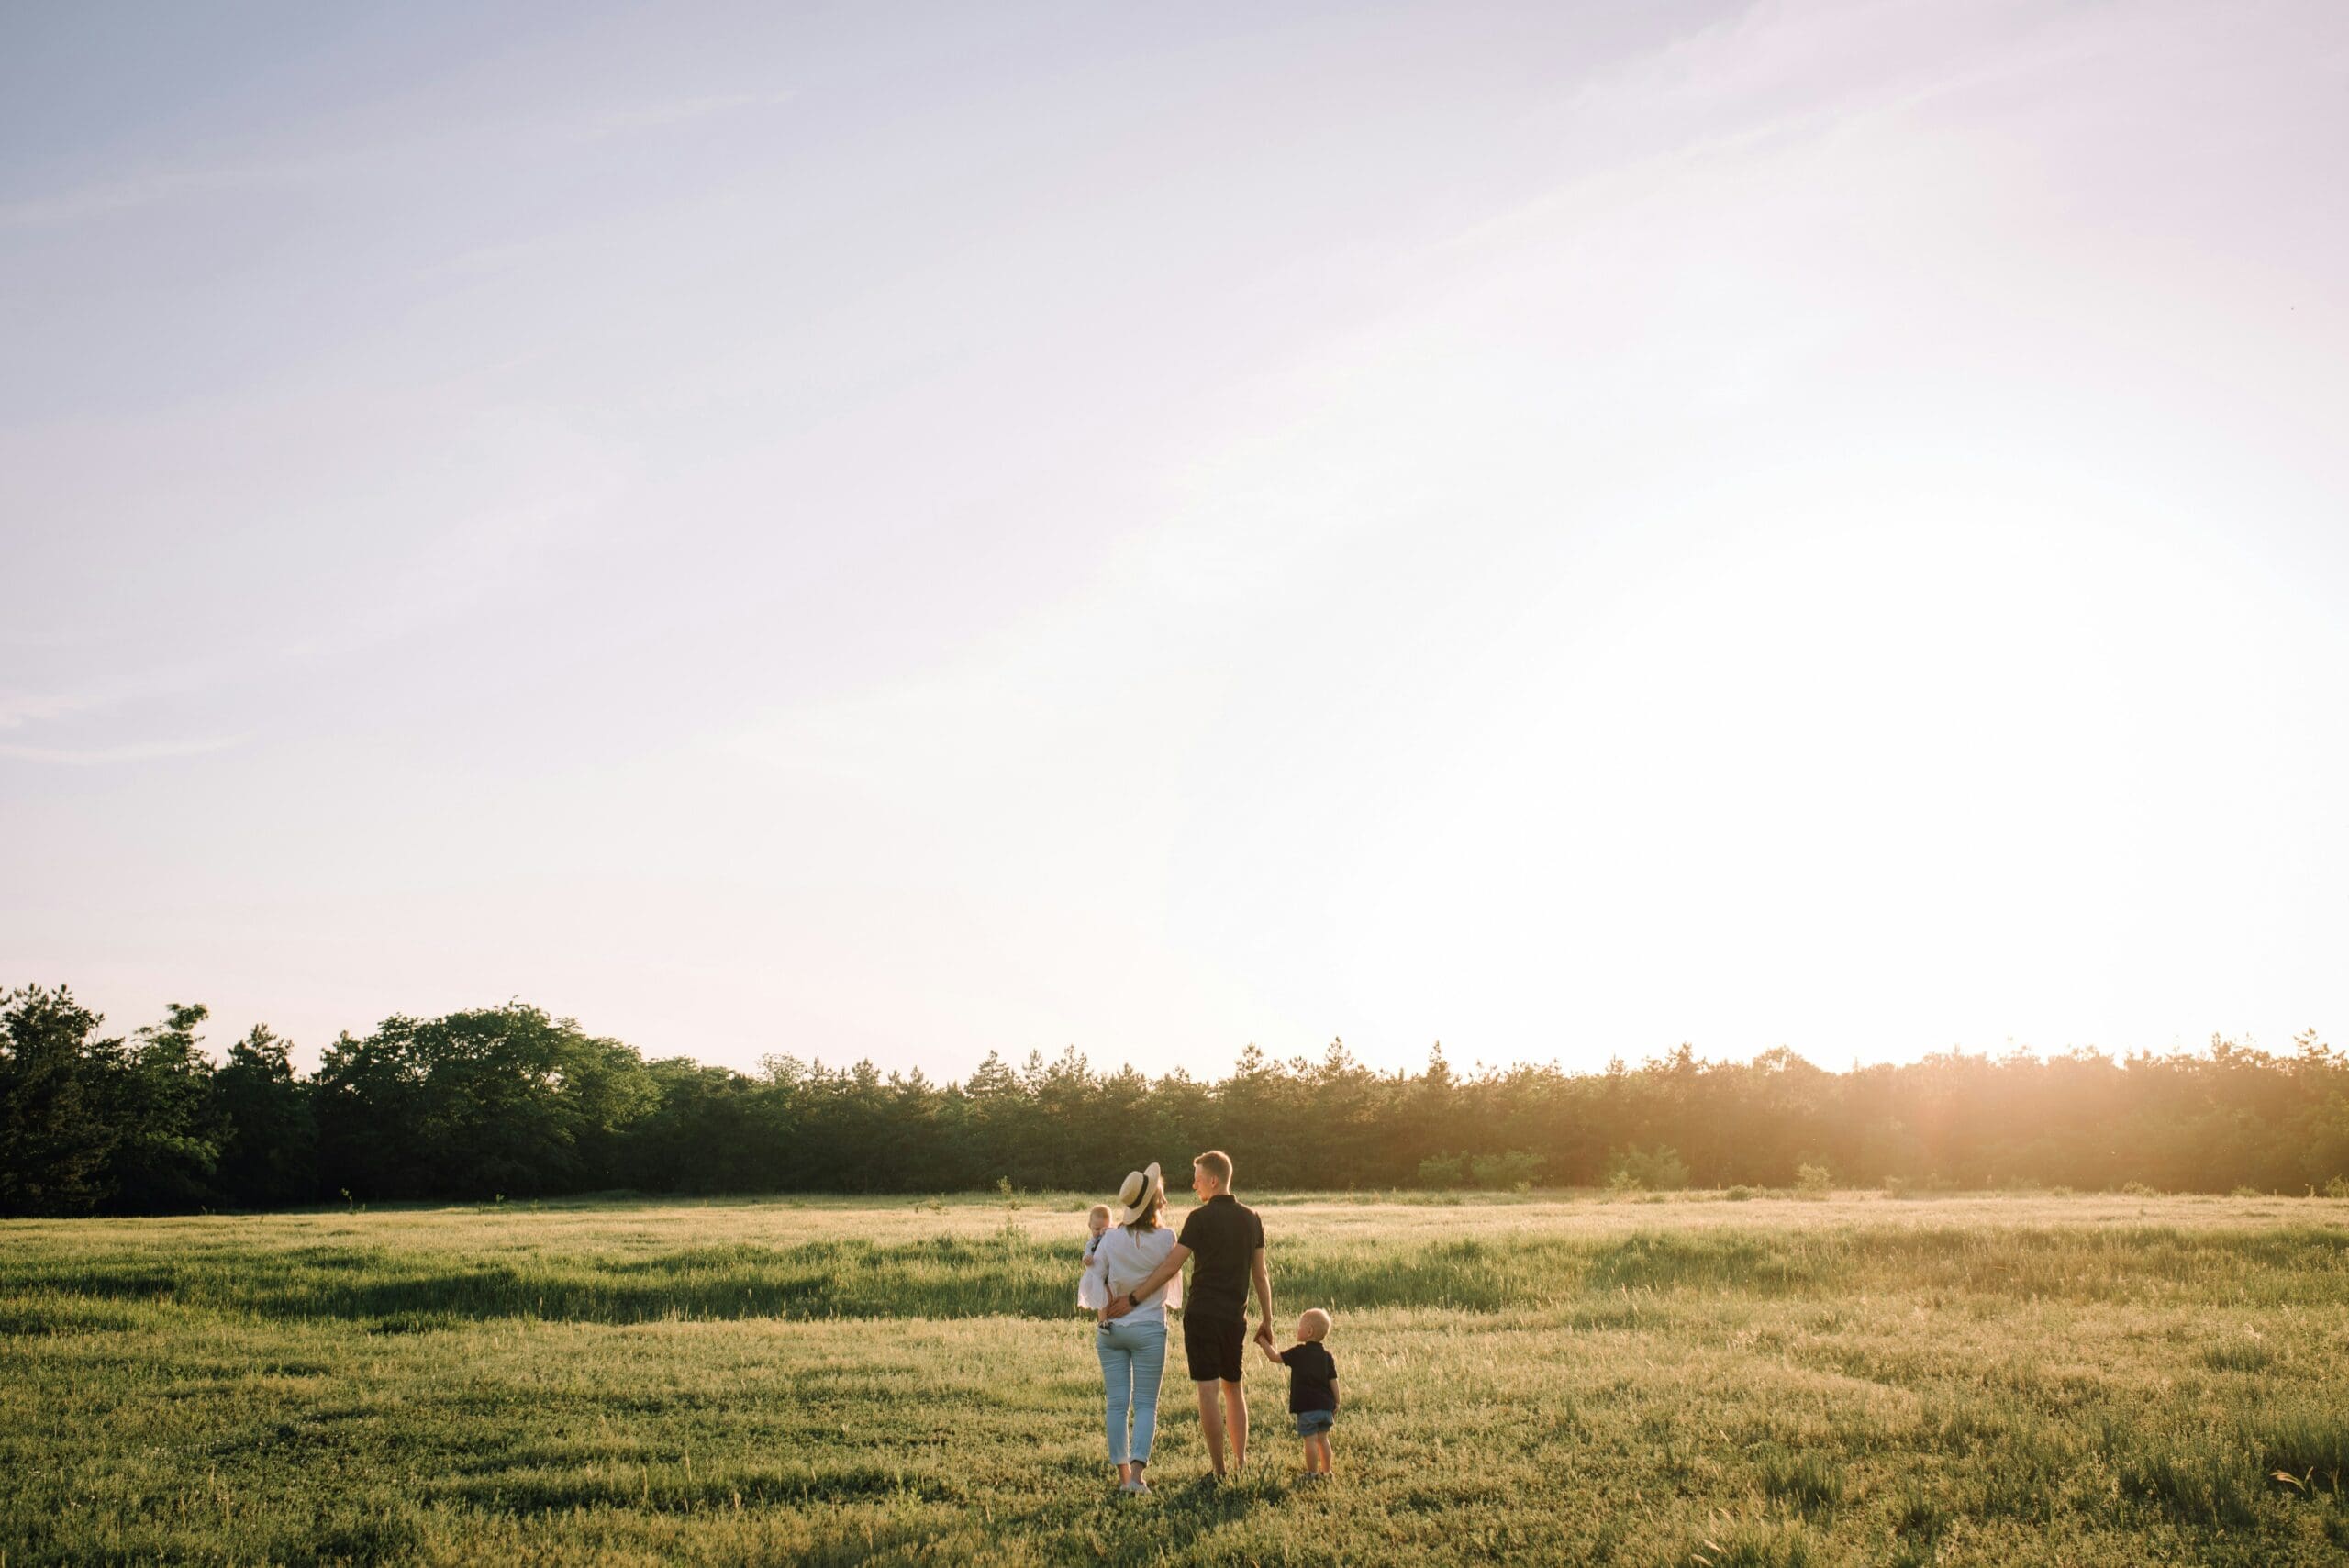 A family embracing while standing in an open field at sunset, symbolising the warmth and unity that can come from the adoption process in Australia.